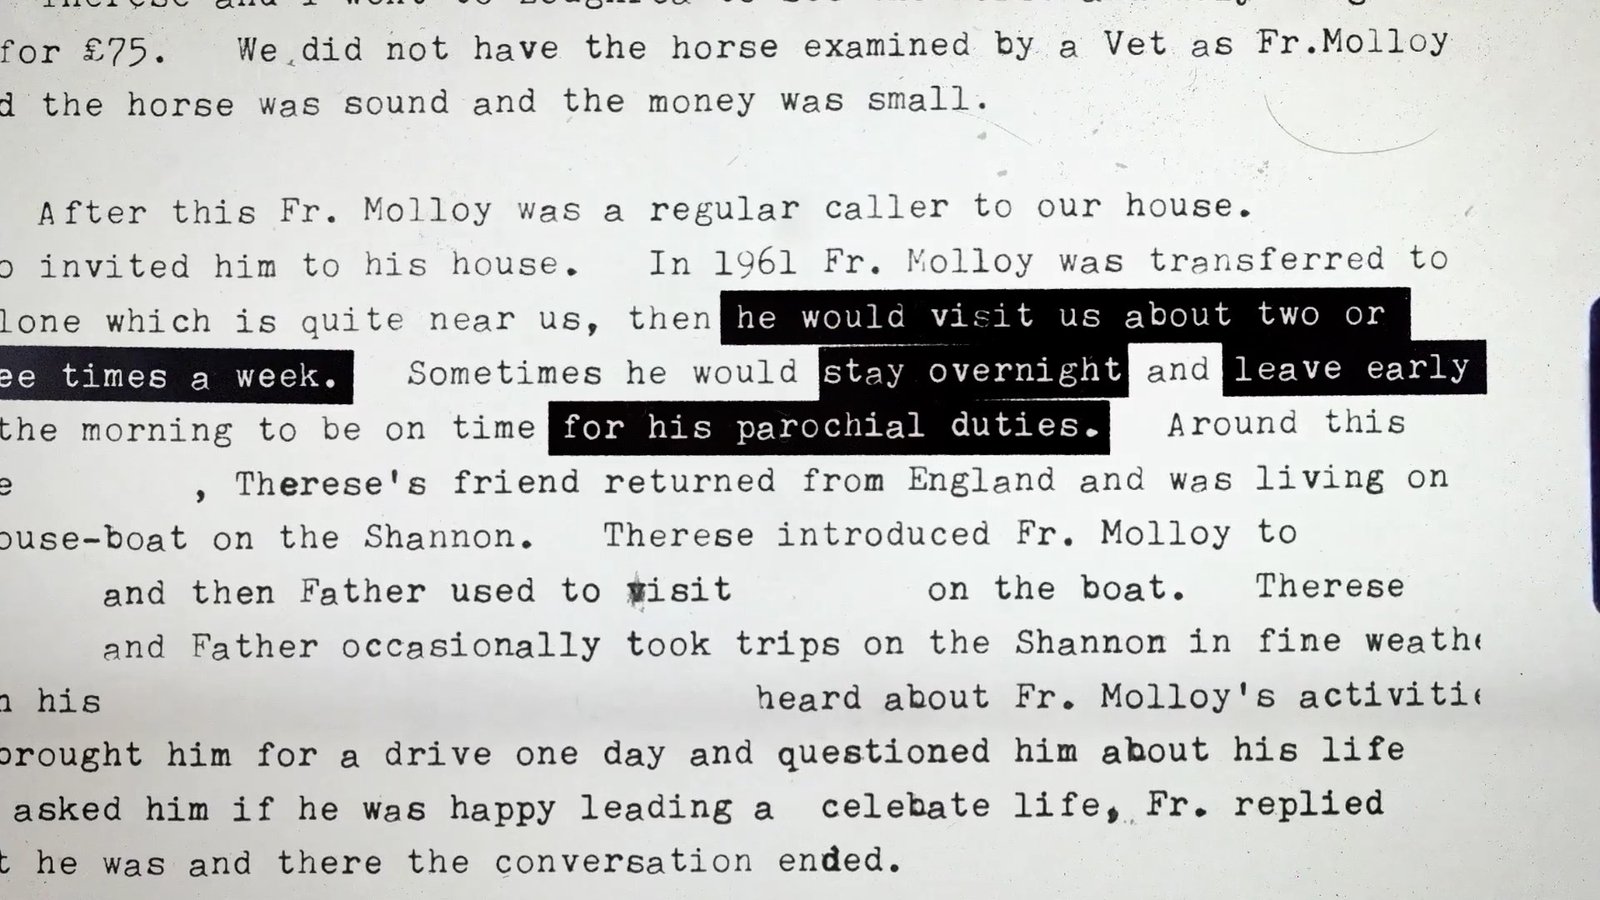 Image - In one document, Richard Flynn wrote that Fr Molloy would visit his home about two or three times per week